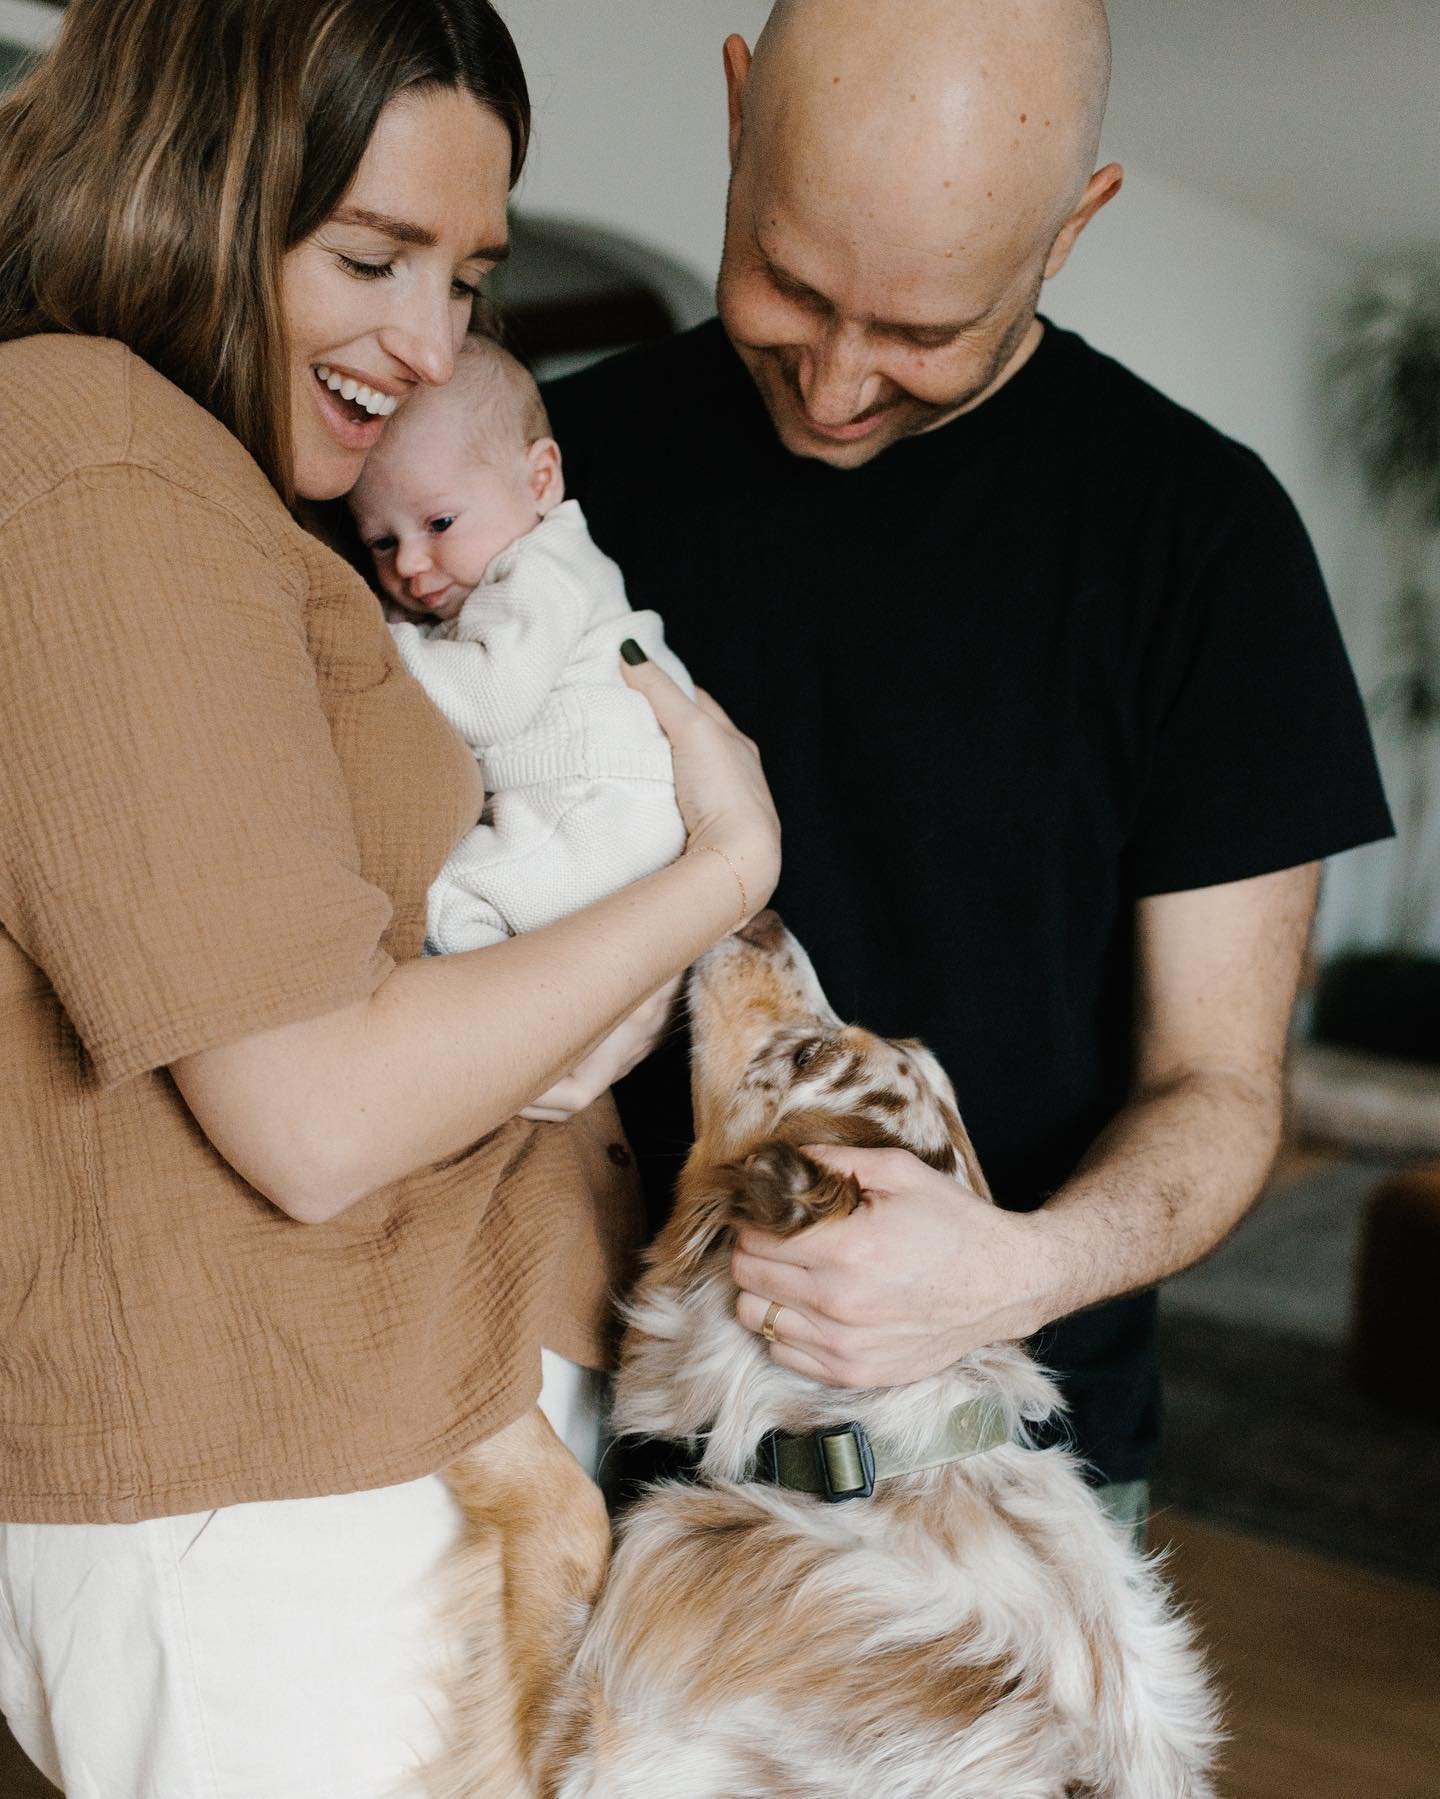 When you&rsquo;re excited about your newest family member. 🐕 Loved seeing this sweet pup&rsquo;s gentle eagerness to be close to the newest addition to the family, both after the baby arrived and before (swipe to see). Adding a baby to the mix can b